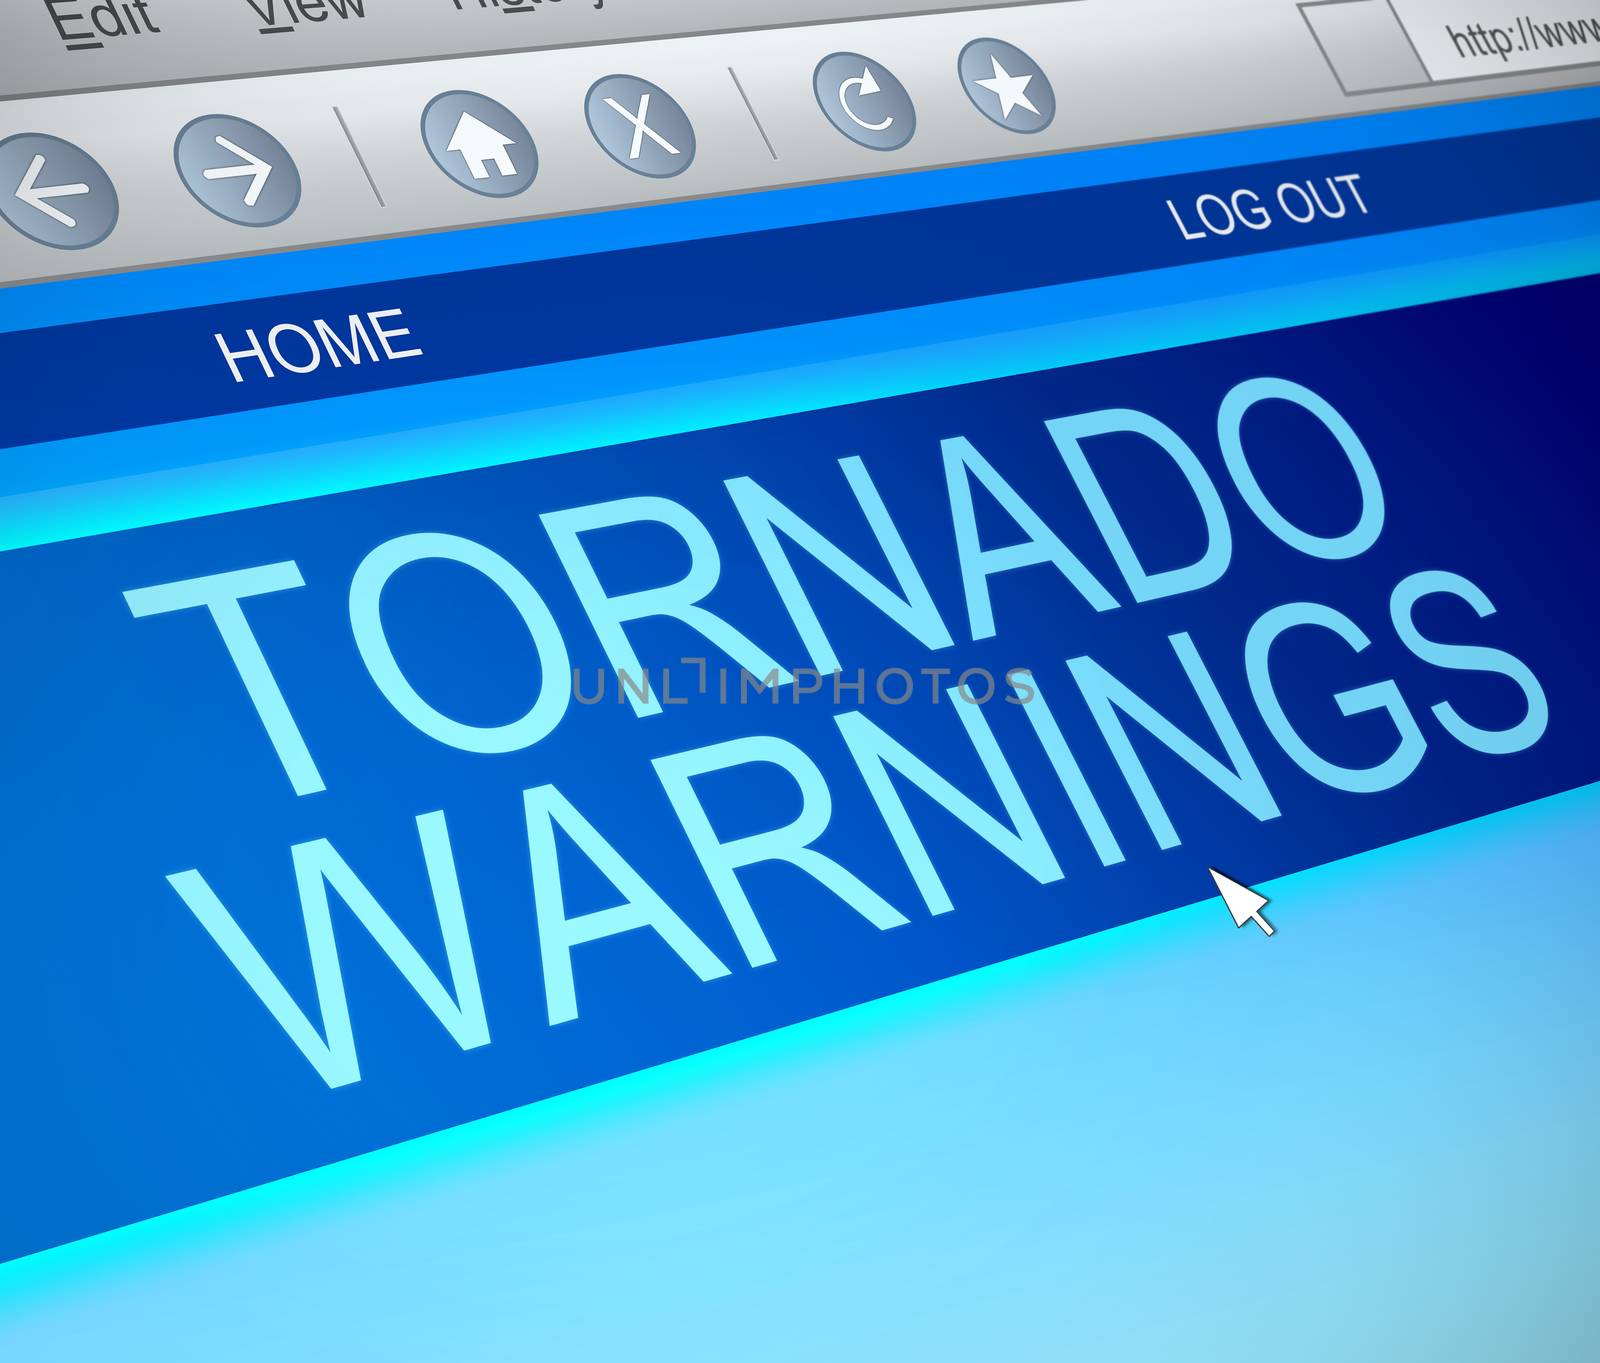 Illustration depicting a computer screen capture with a tornado warning concept.